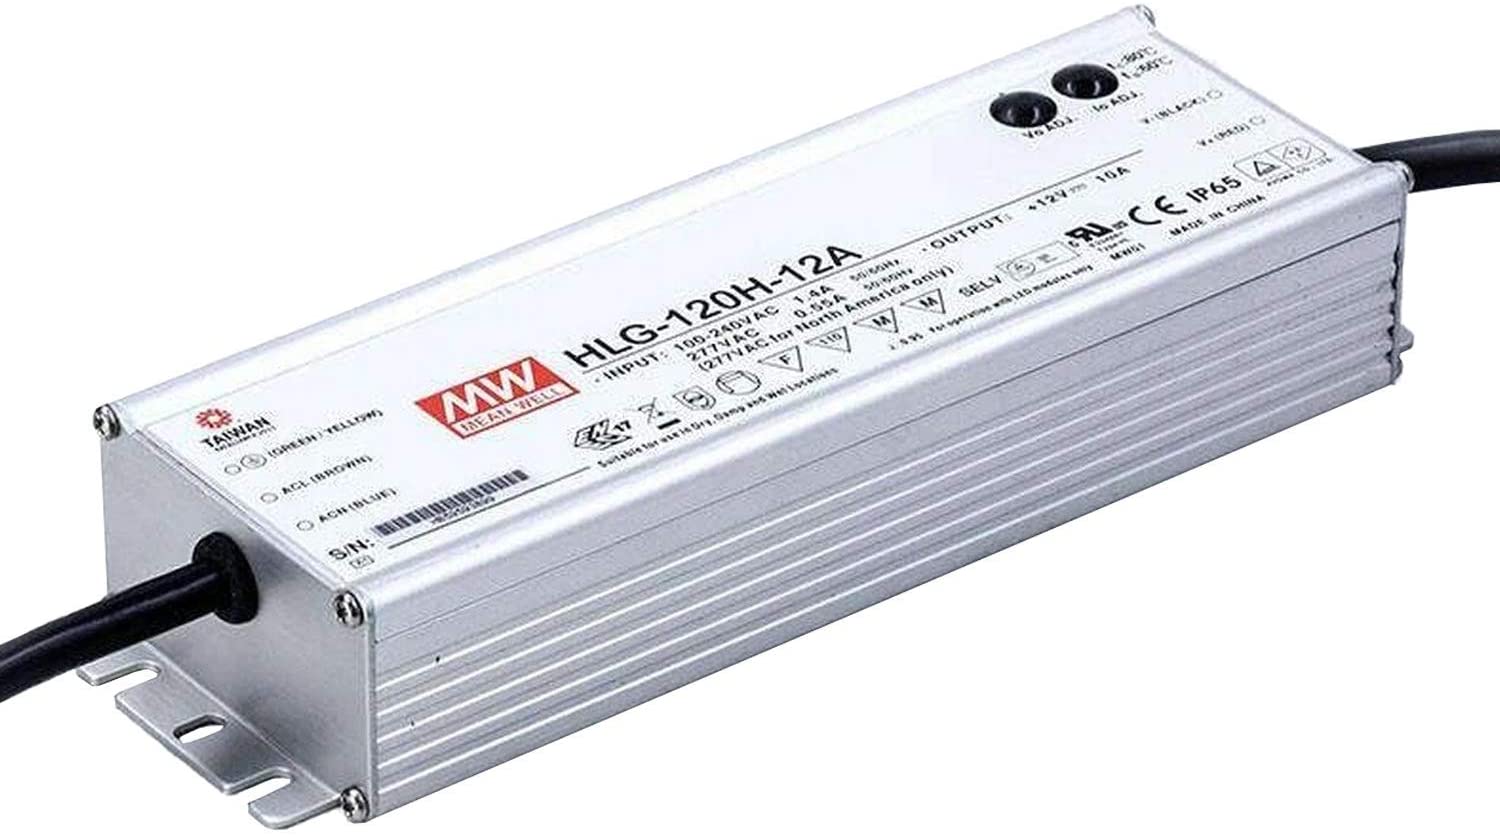 MW Mean Well HLG-120H-12A 12V 10A 120W Single Output Switching LED Power Supply with PFC